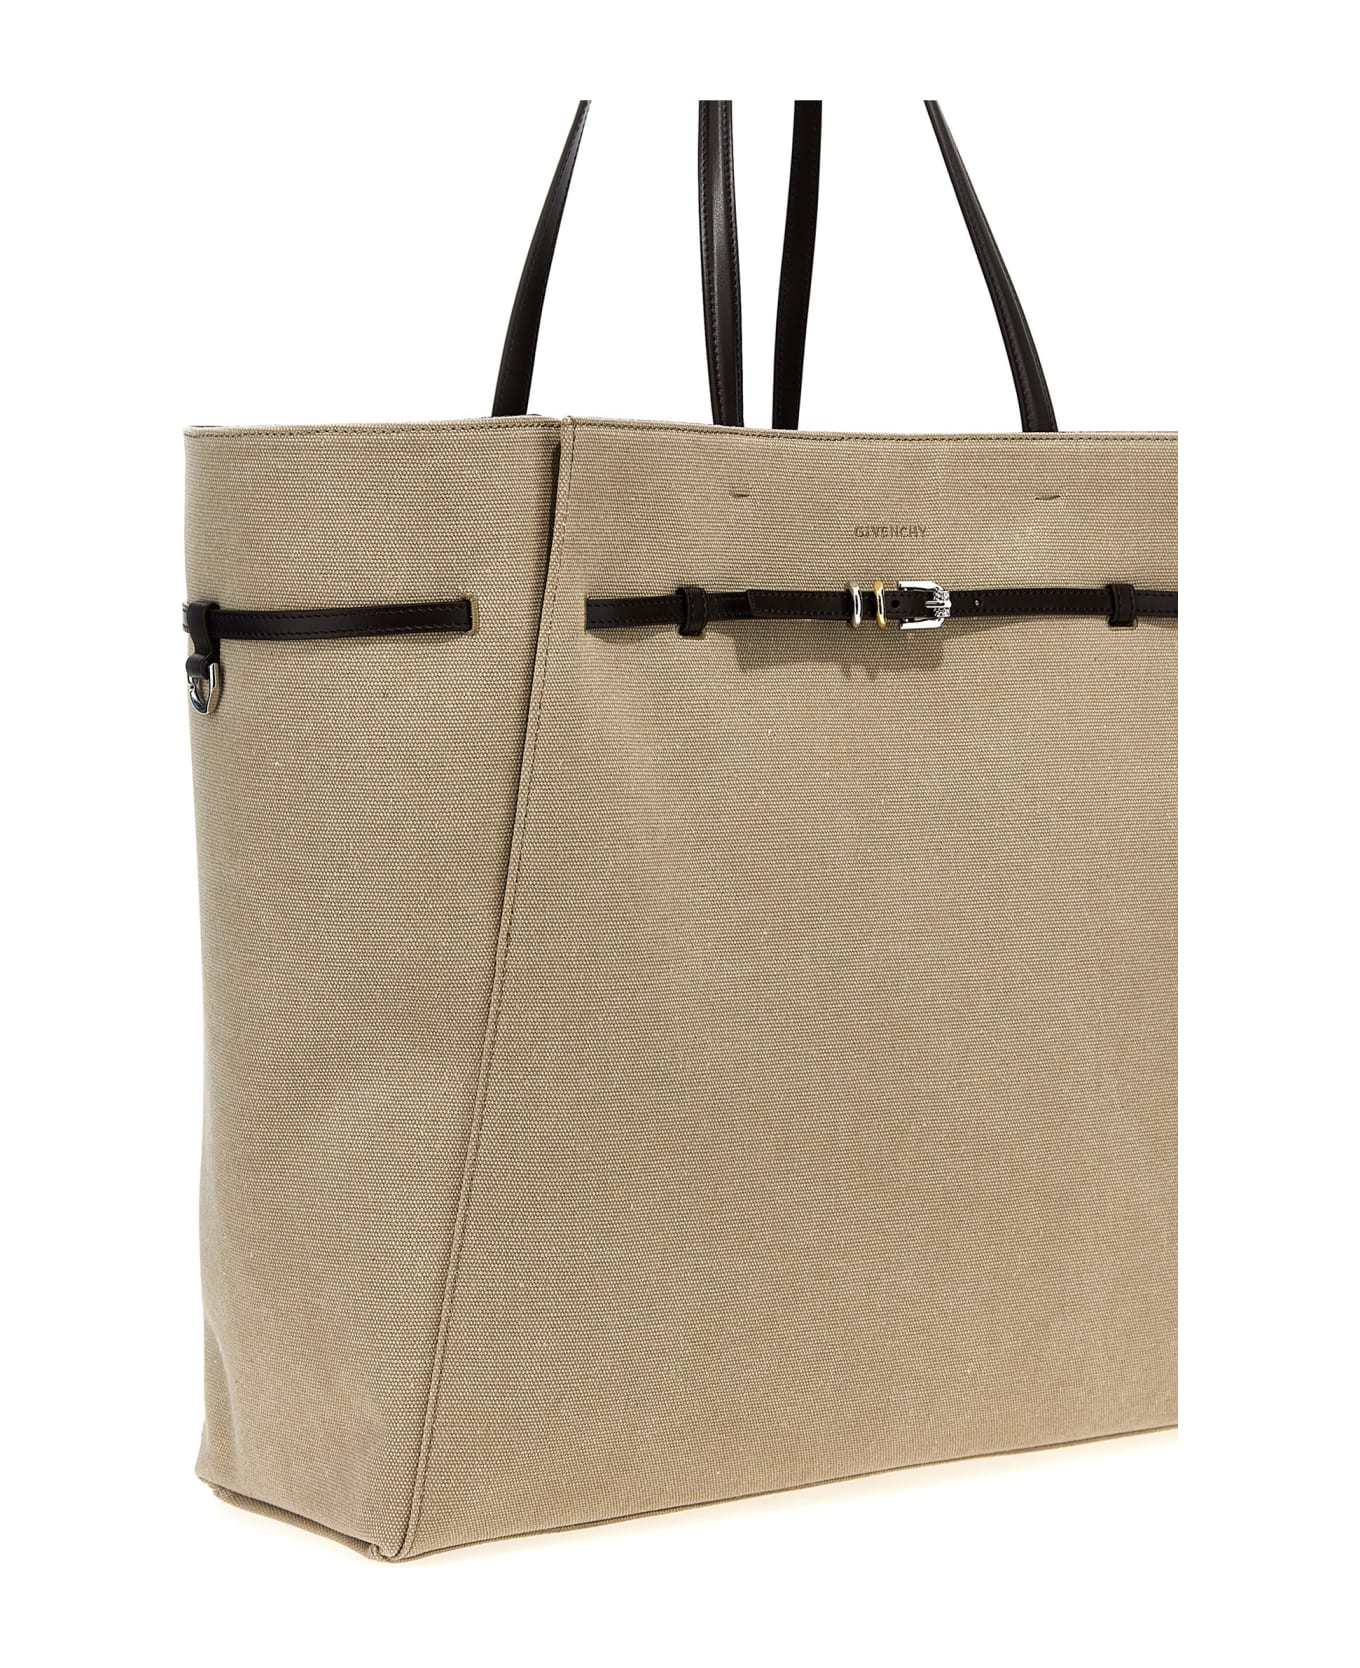 Givenchy 'voyou' Large Shopping Bag - Beige